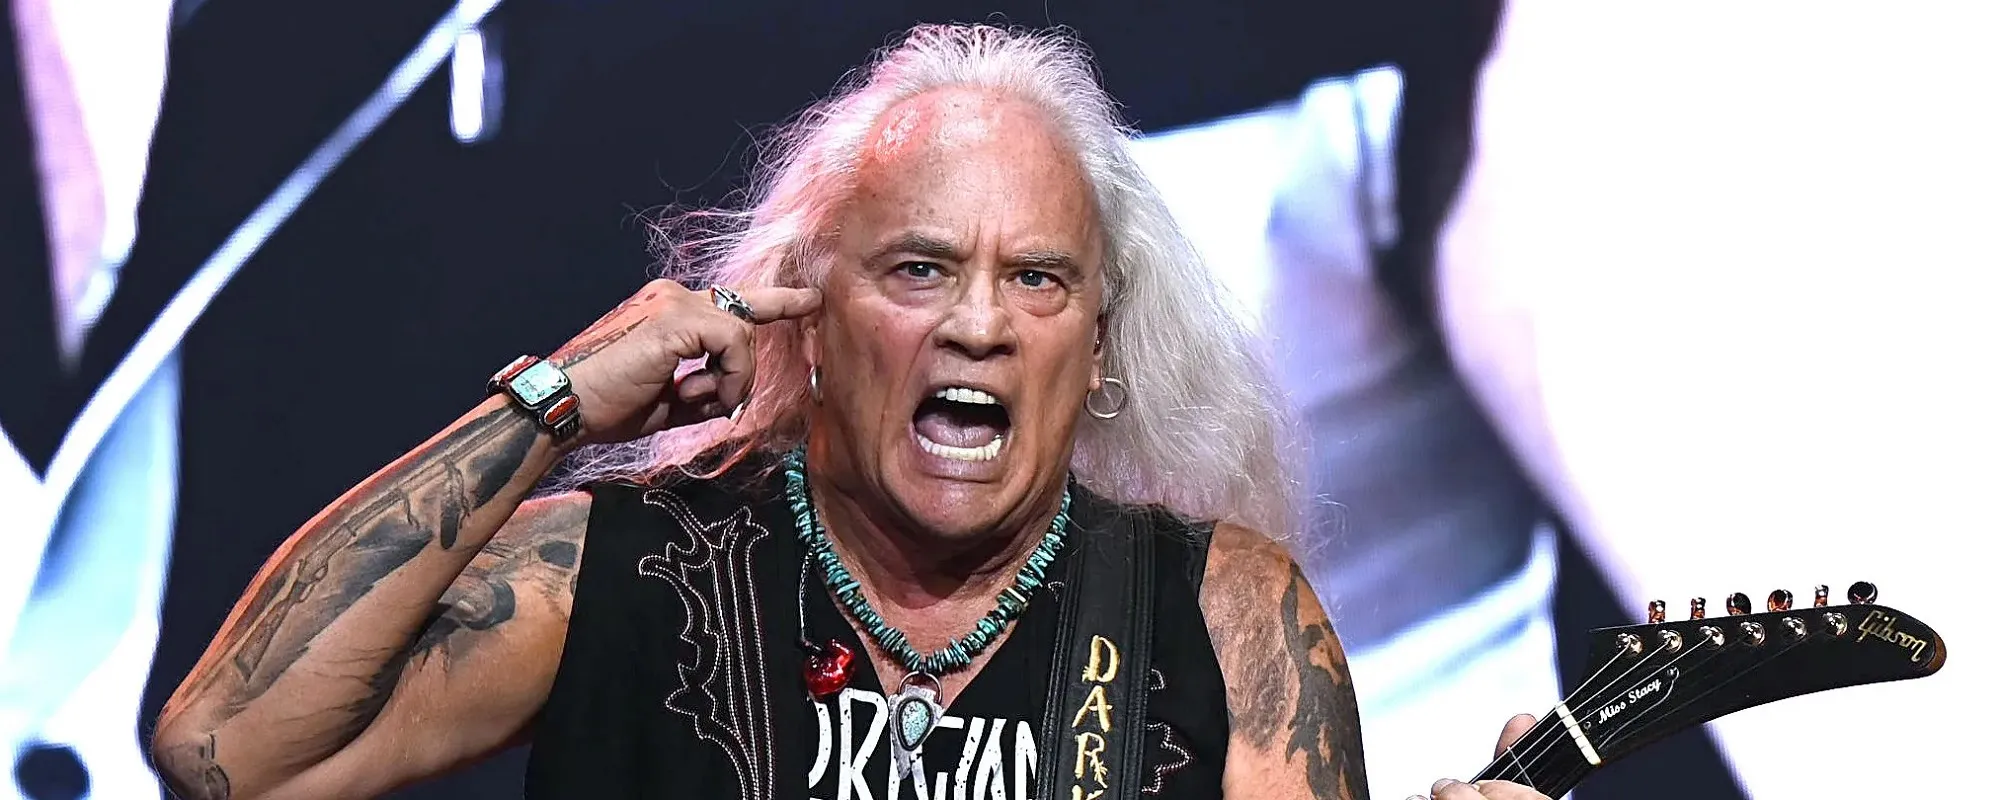 Lynyrd Skynyrd’s Rickey Medlocke Teases Exciting Onstage Collaboration at Nashville New Year’s Eve Show